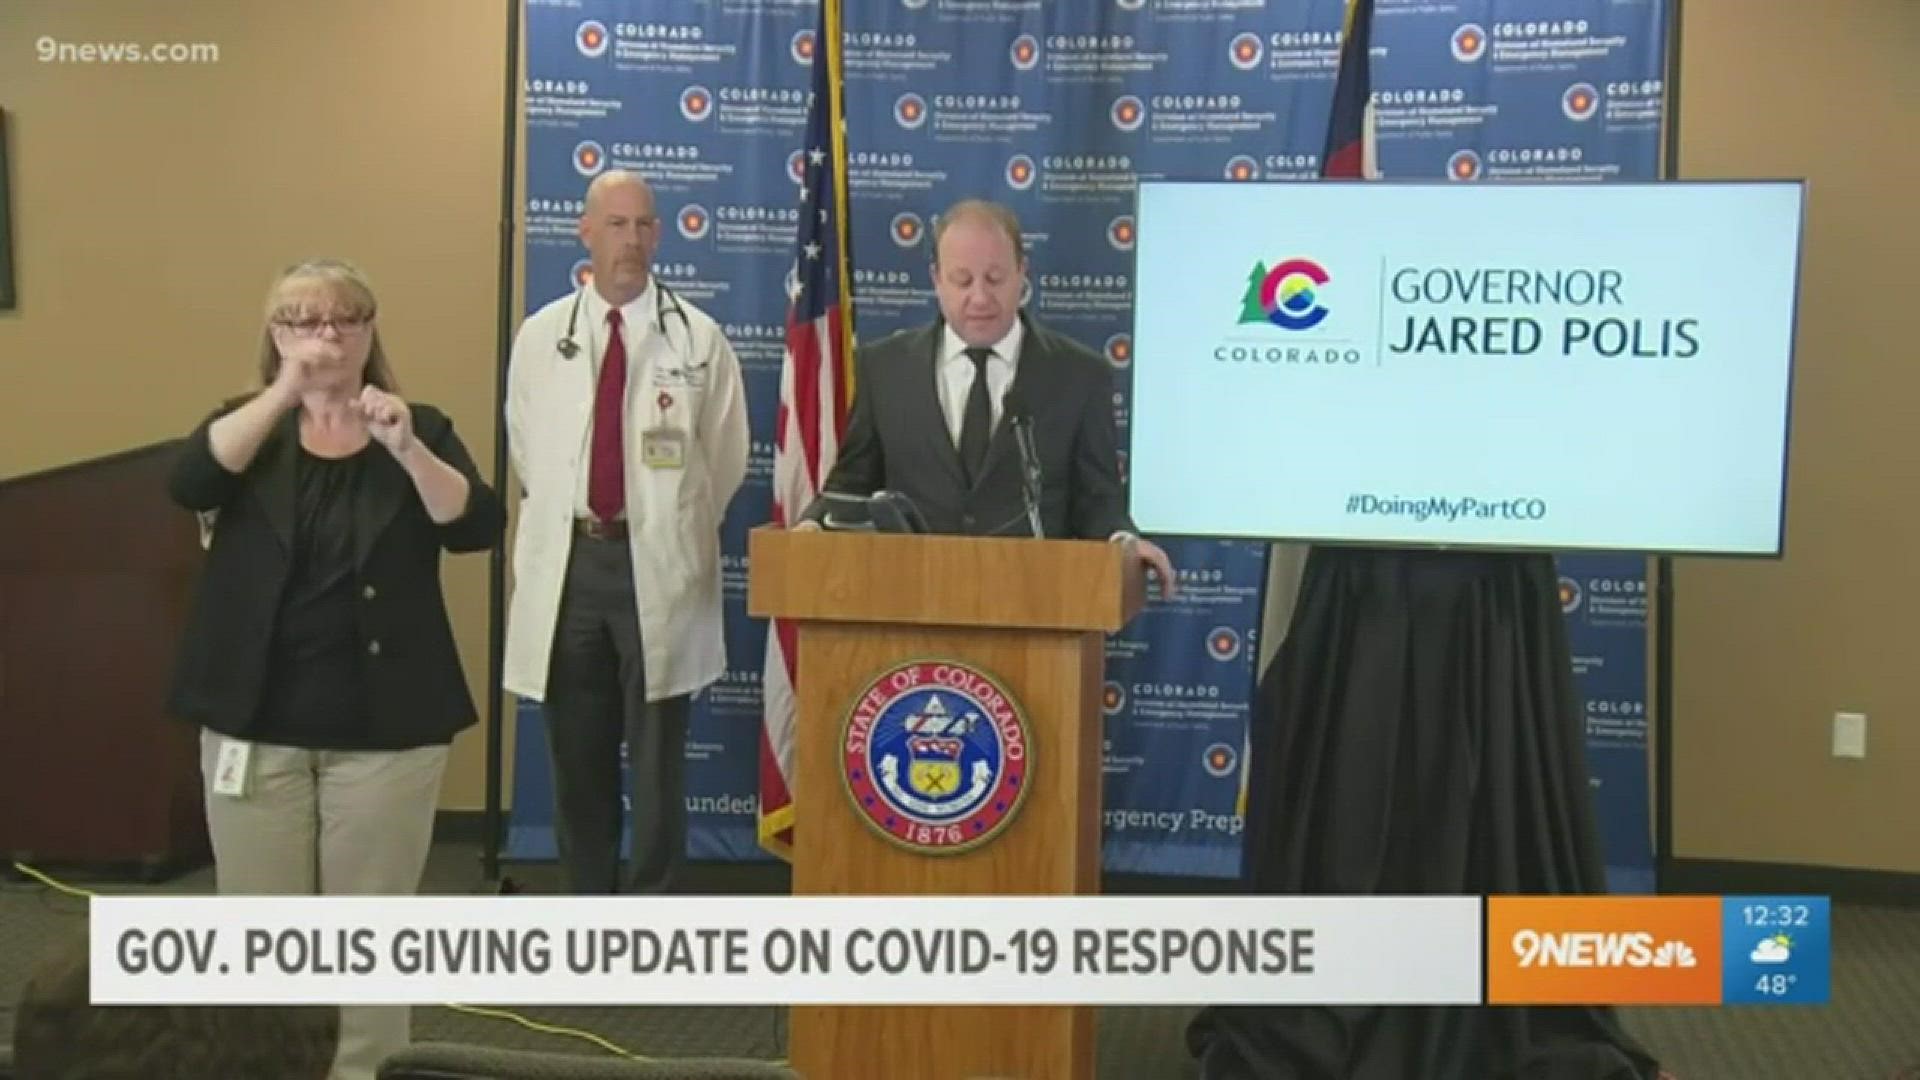 A total of 51 people have now died from COVID-19 in Colorado, health officials said Monday.